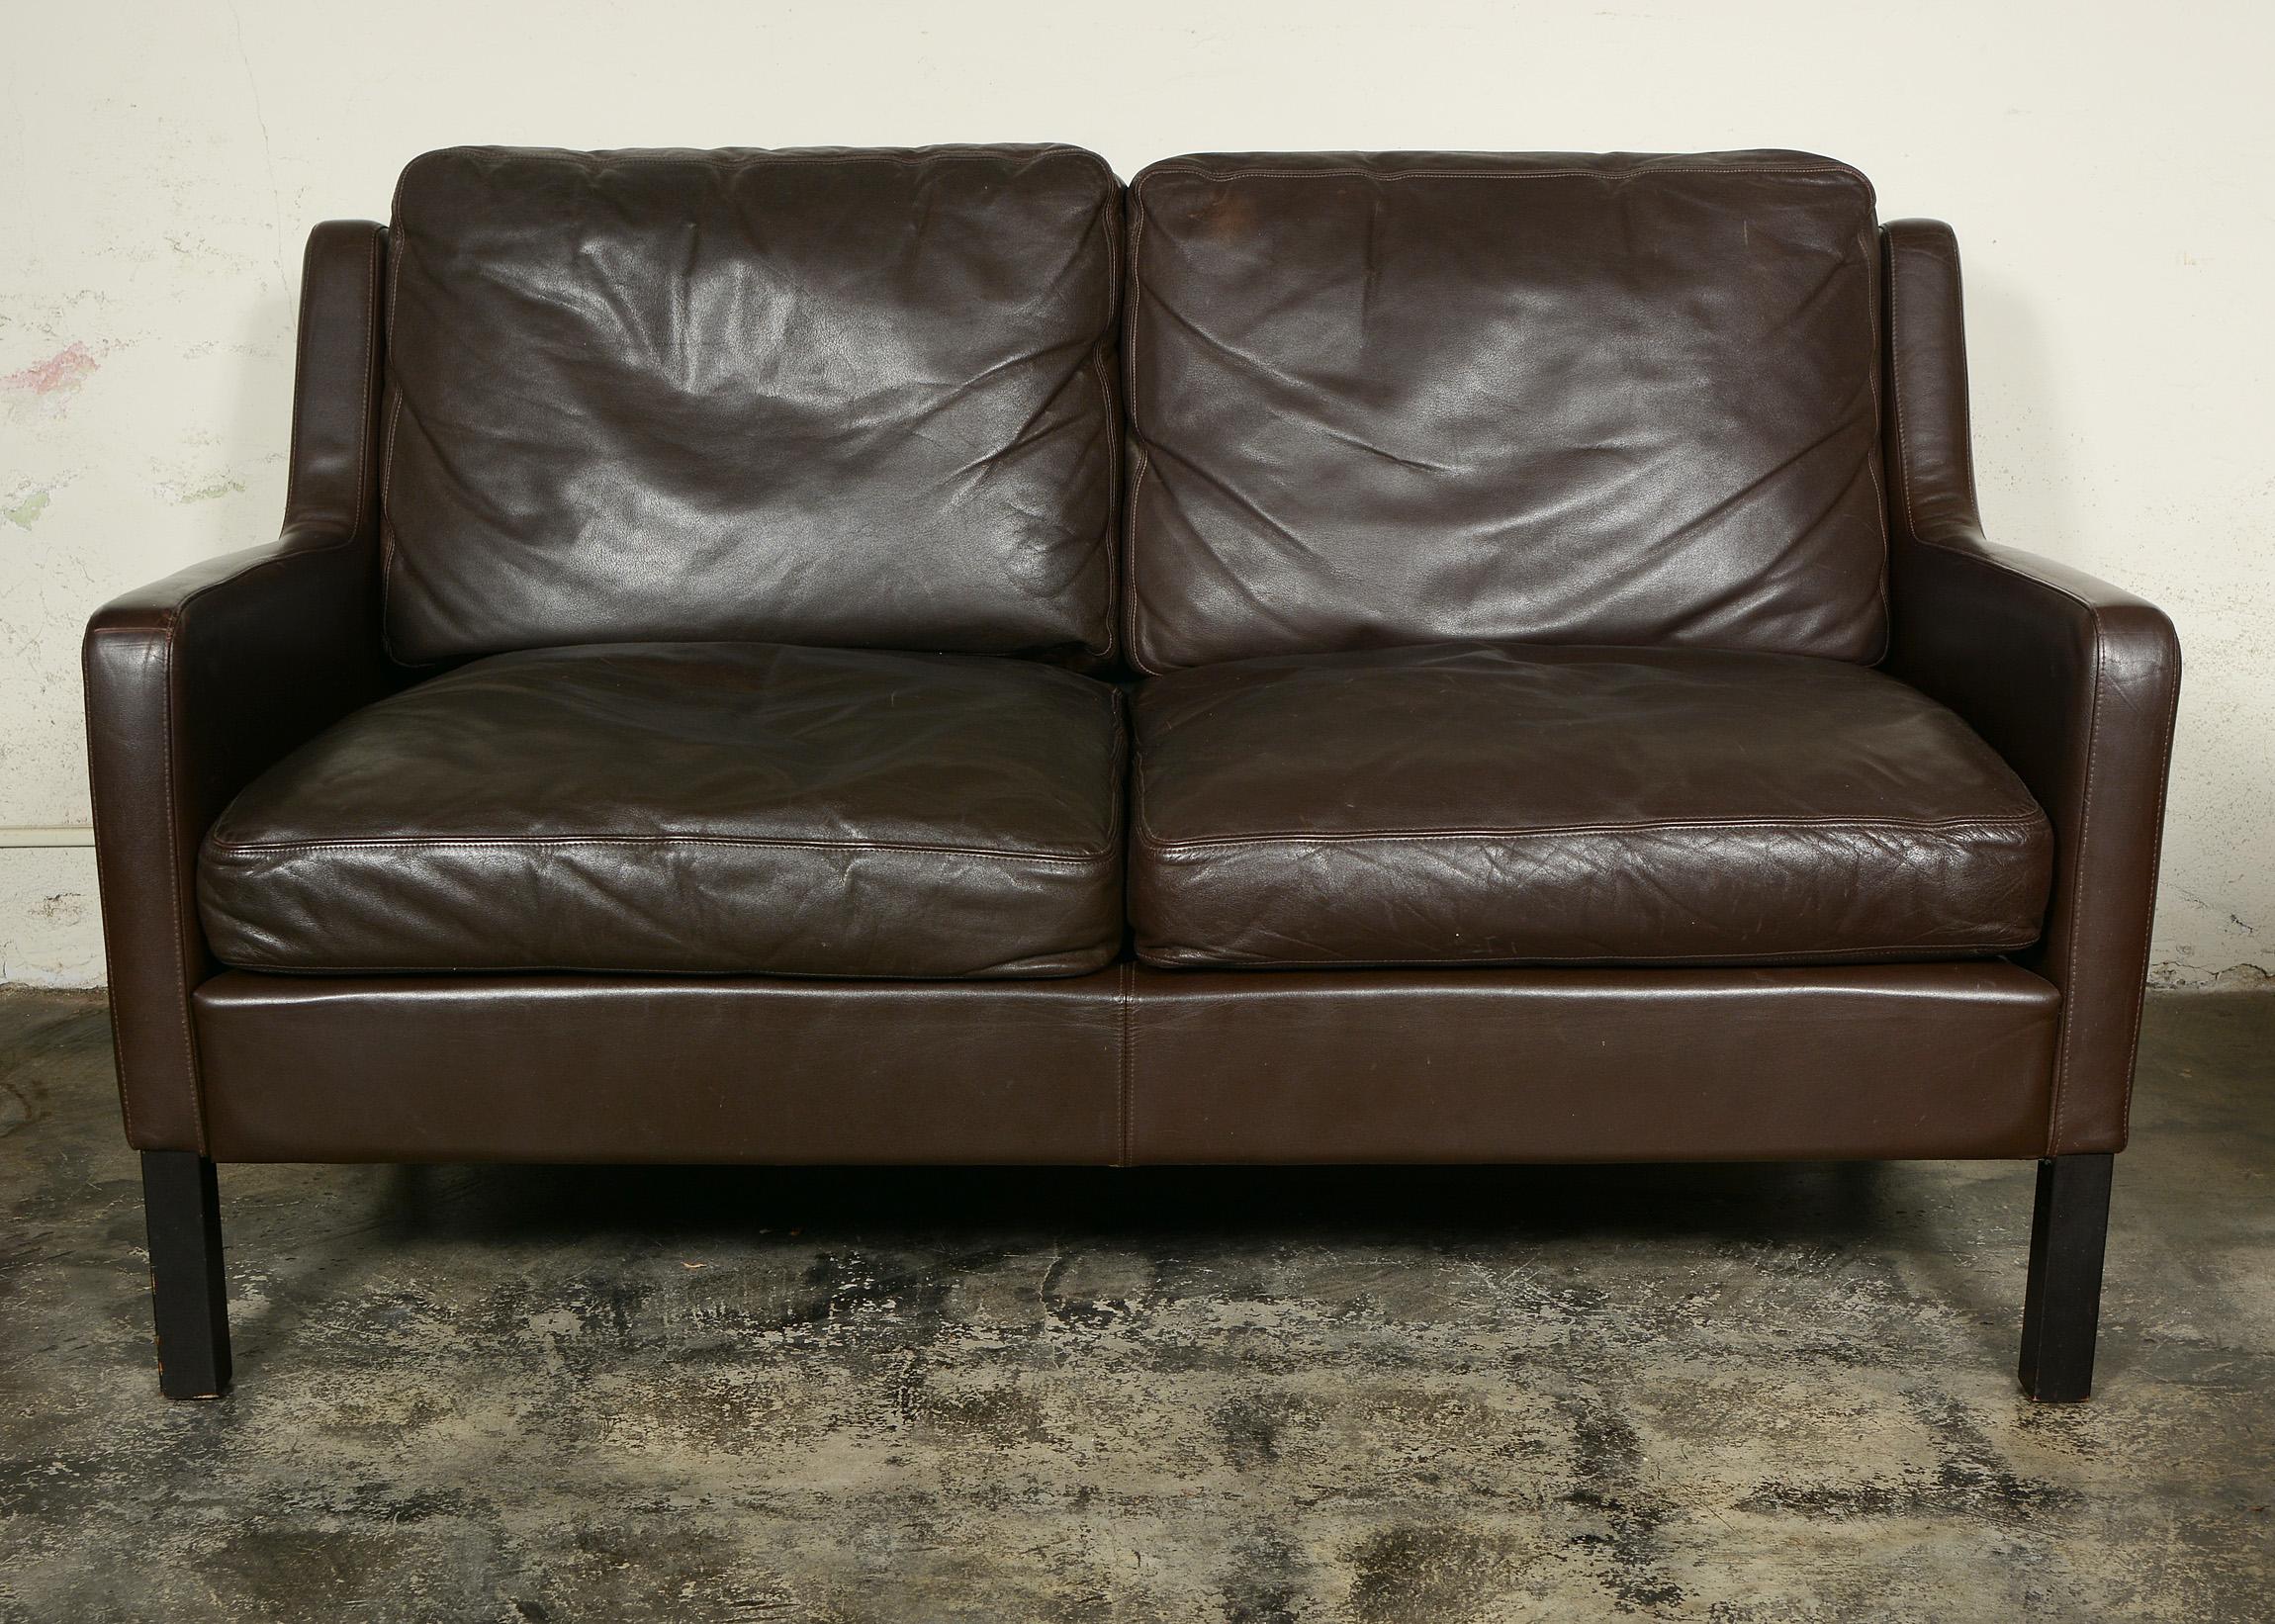 This two seat Danish sofa is covered in a dark brown leather. The styling is reminiscent of Kaare Klint or Borge Mogensen. The leather shows a little rubbing and wear in spots.